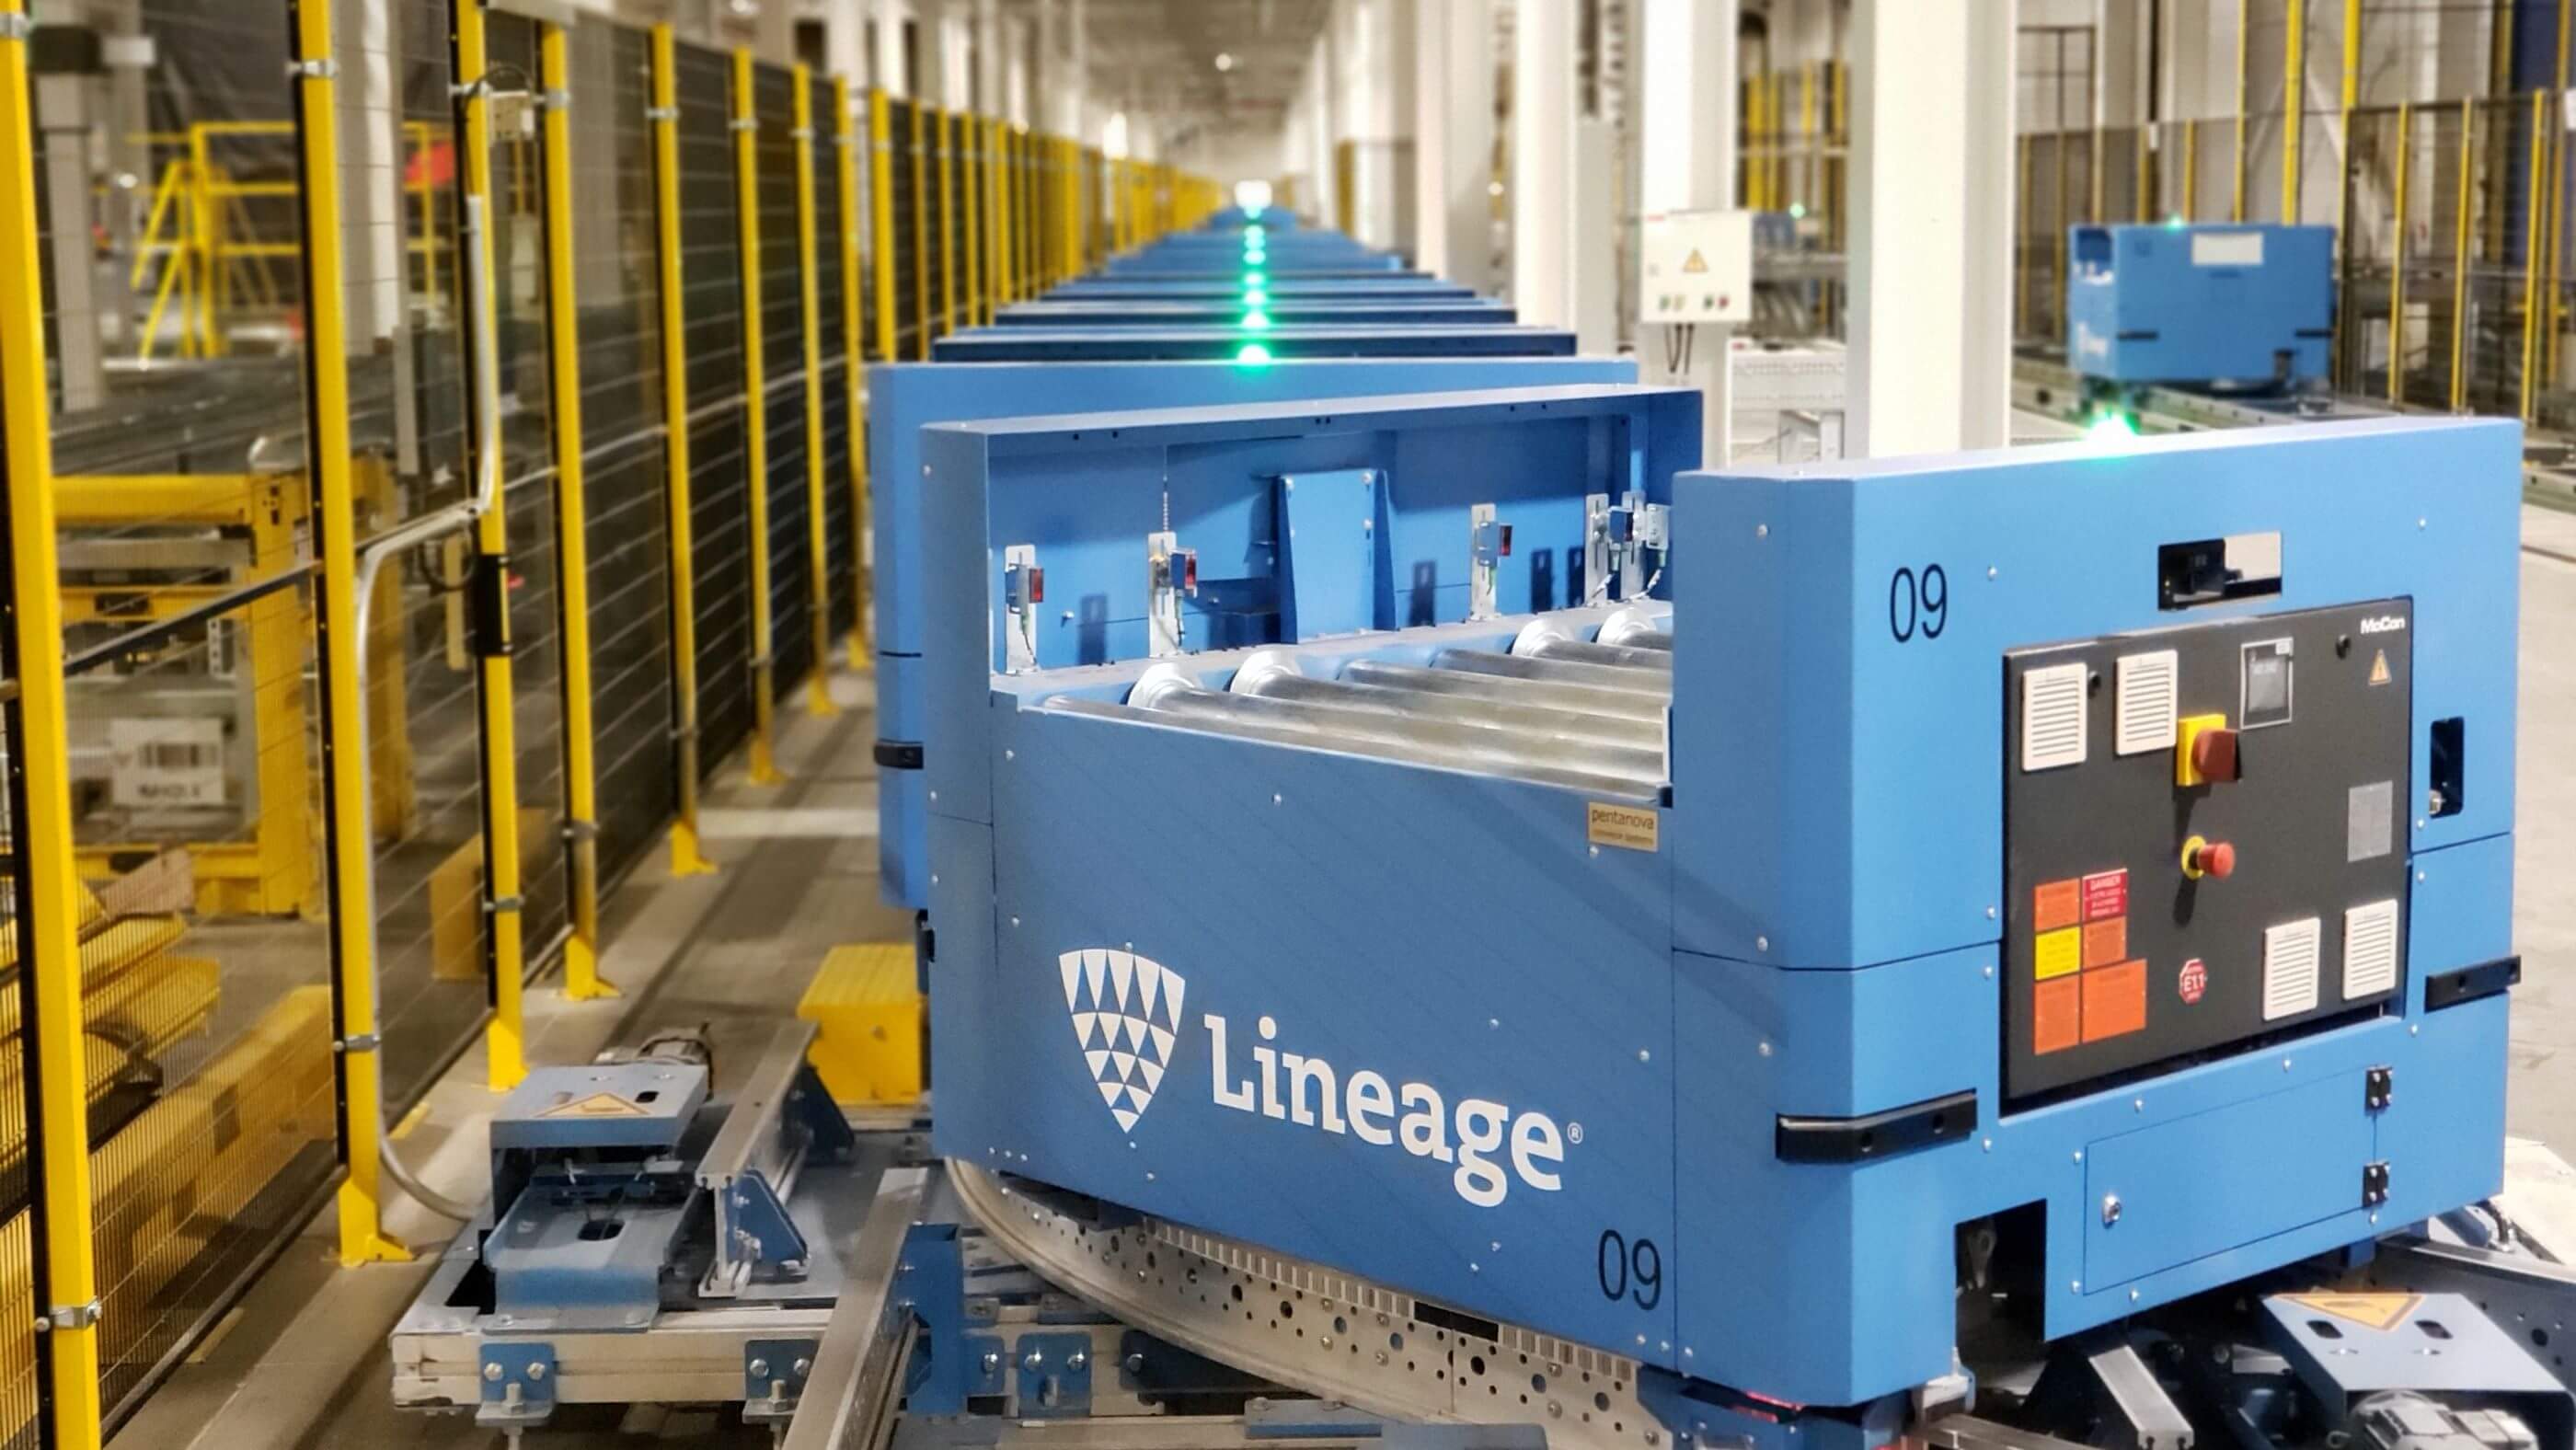 Automated guided cart transporting goods inside a modern, well-organized Lineage cold storage warehouse.